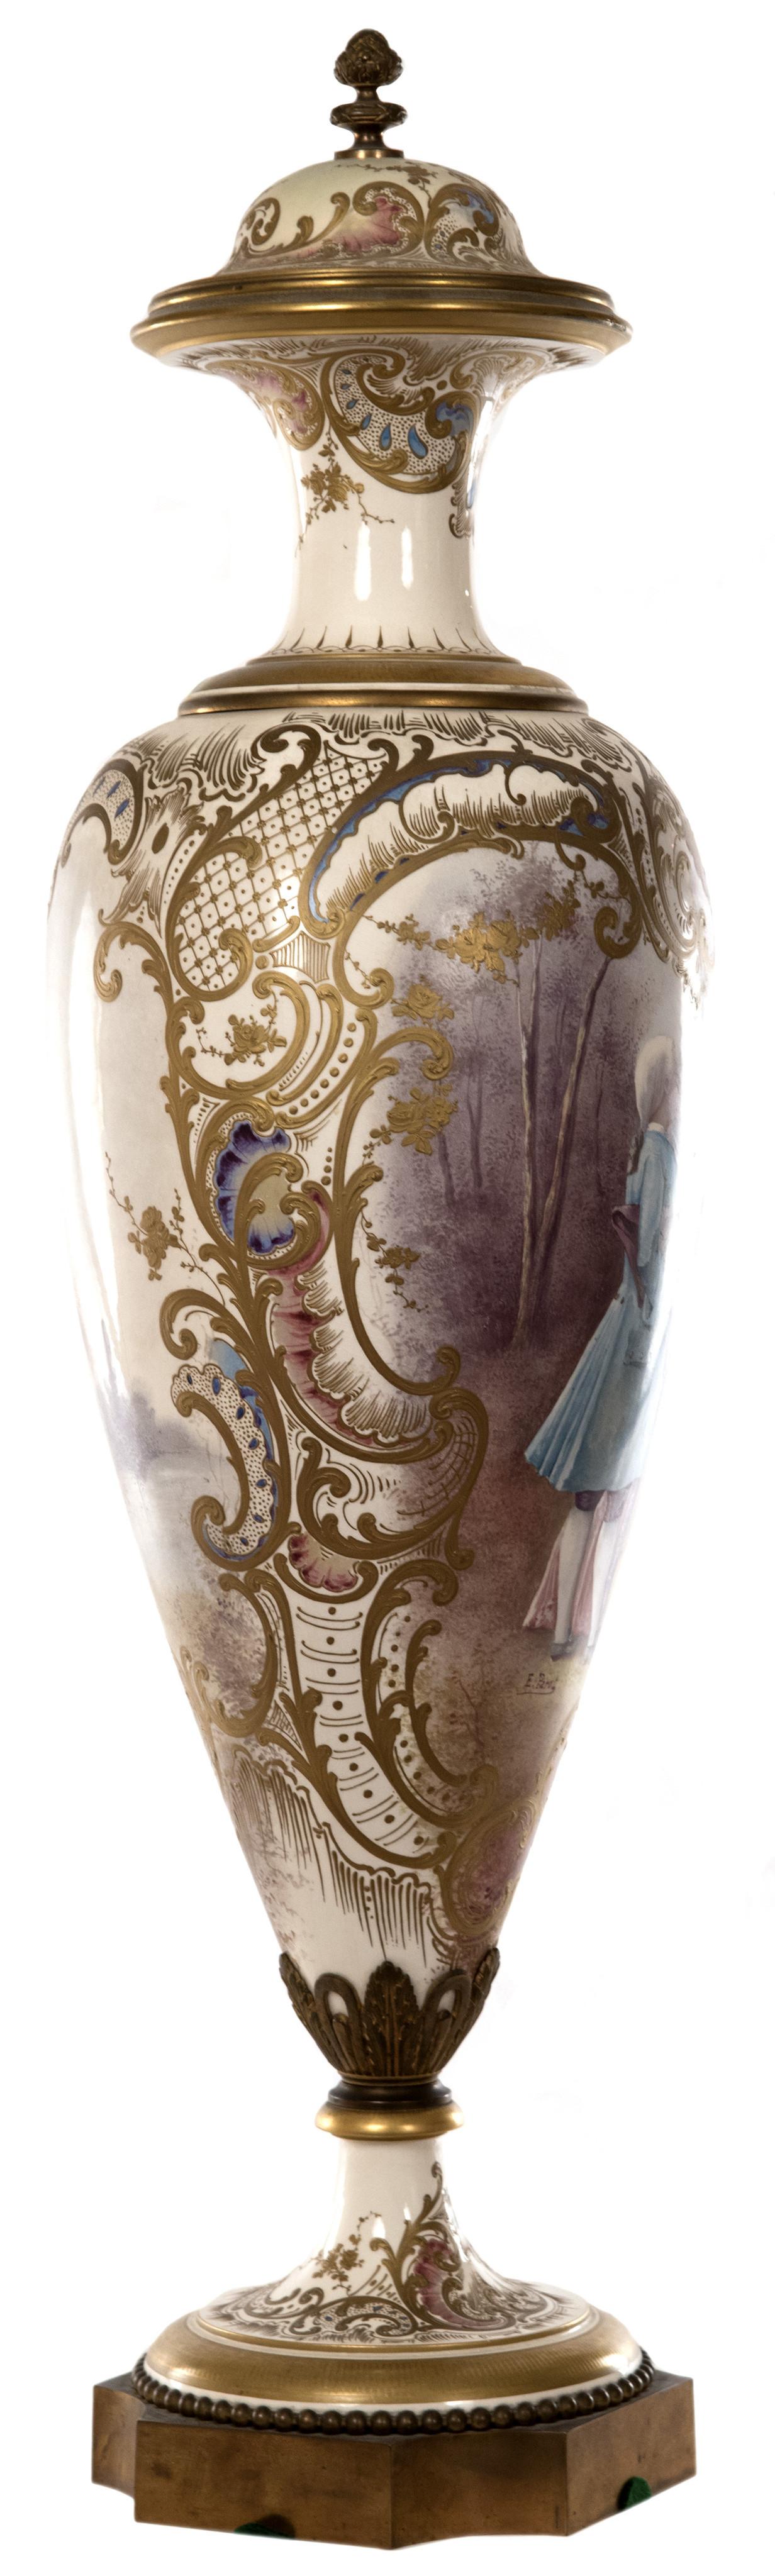 A 19th century French porcelain vase of slim baluster form with slender neck that is decorated with gilded bands and detailed foliate designs, surmounted by a pinecone-shaped finial capping the lid, the tapering and gilt trimmed foot mounted to a